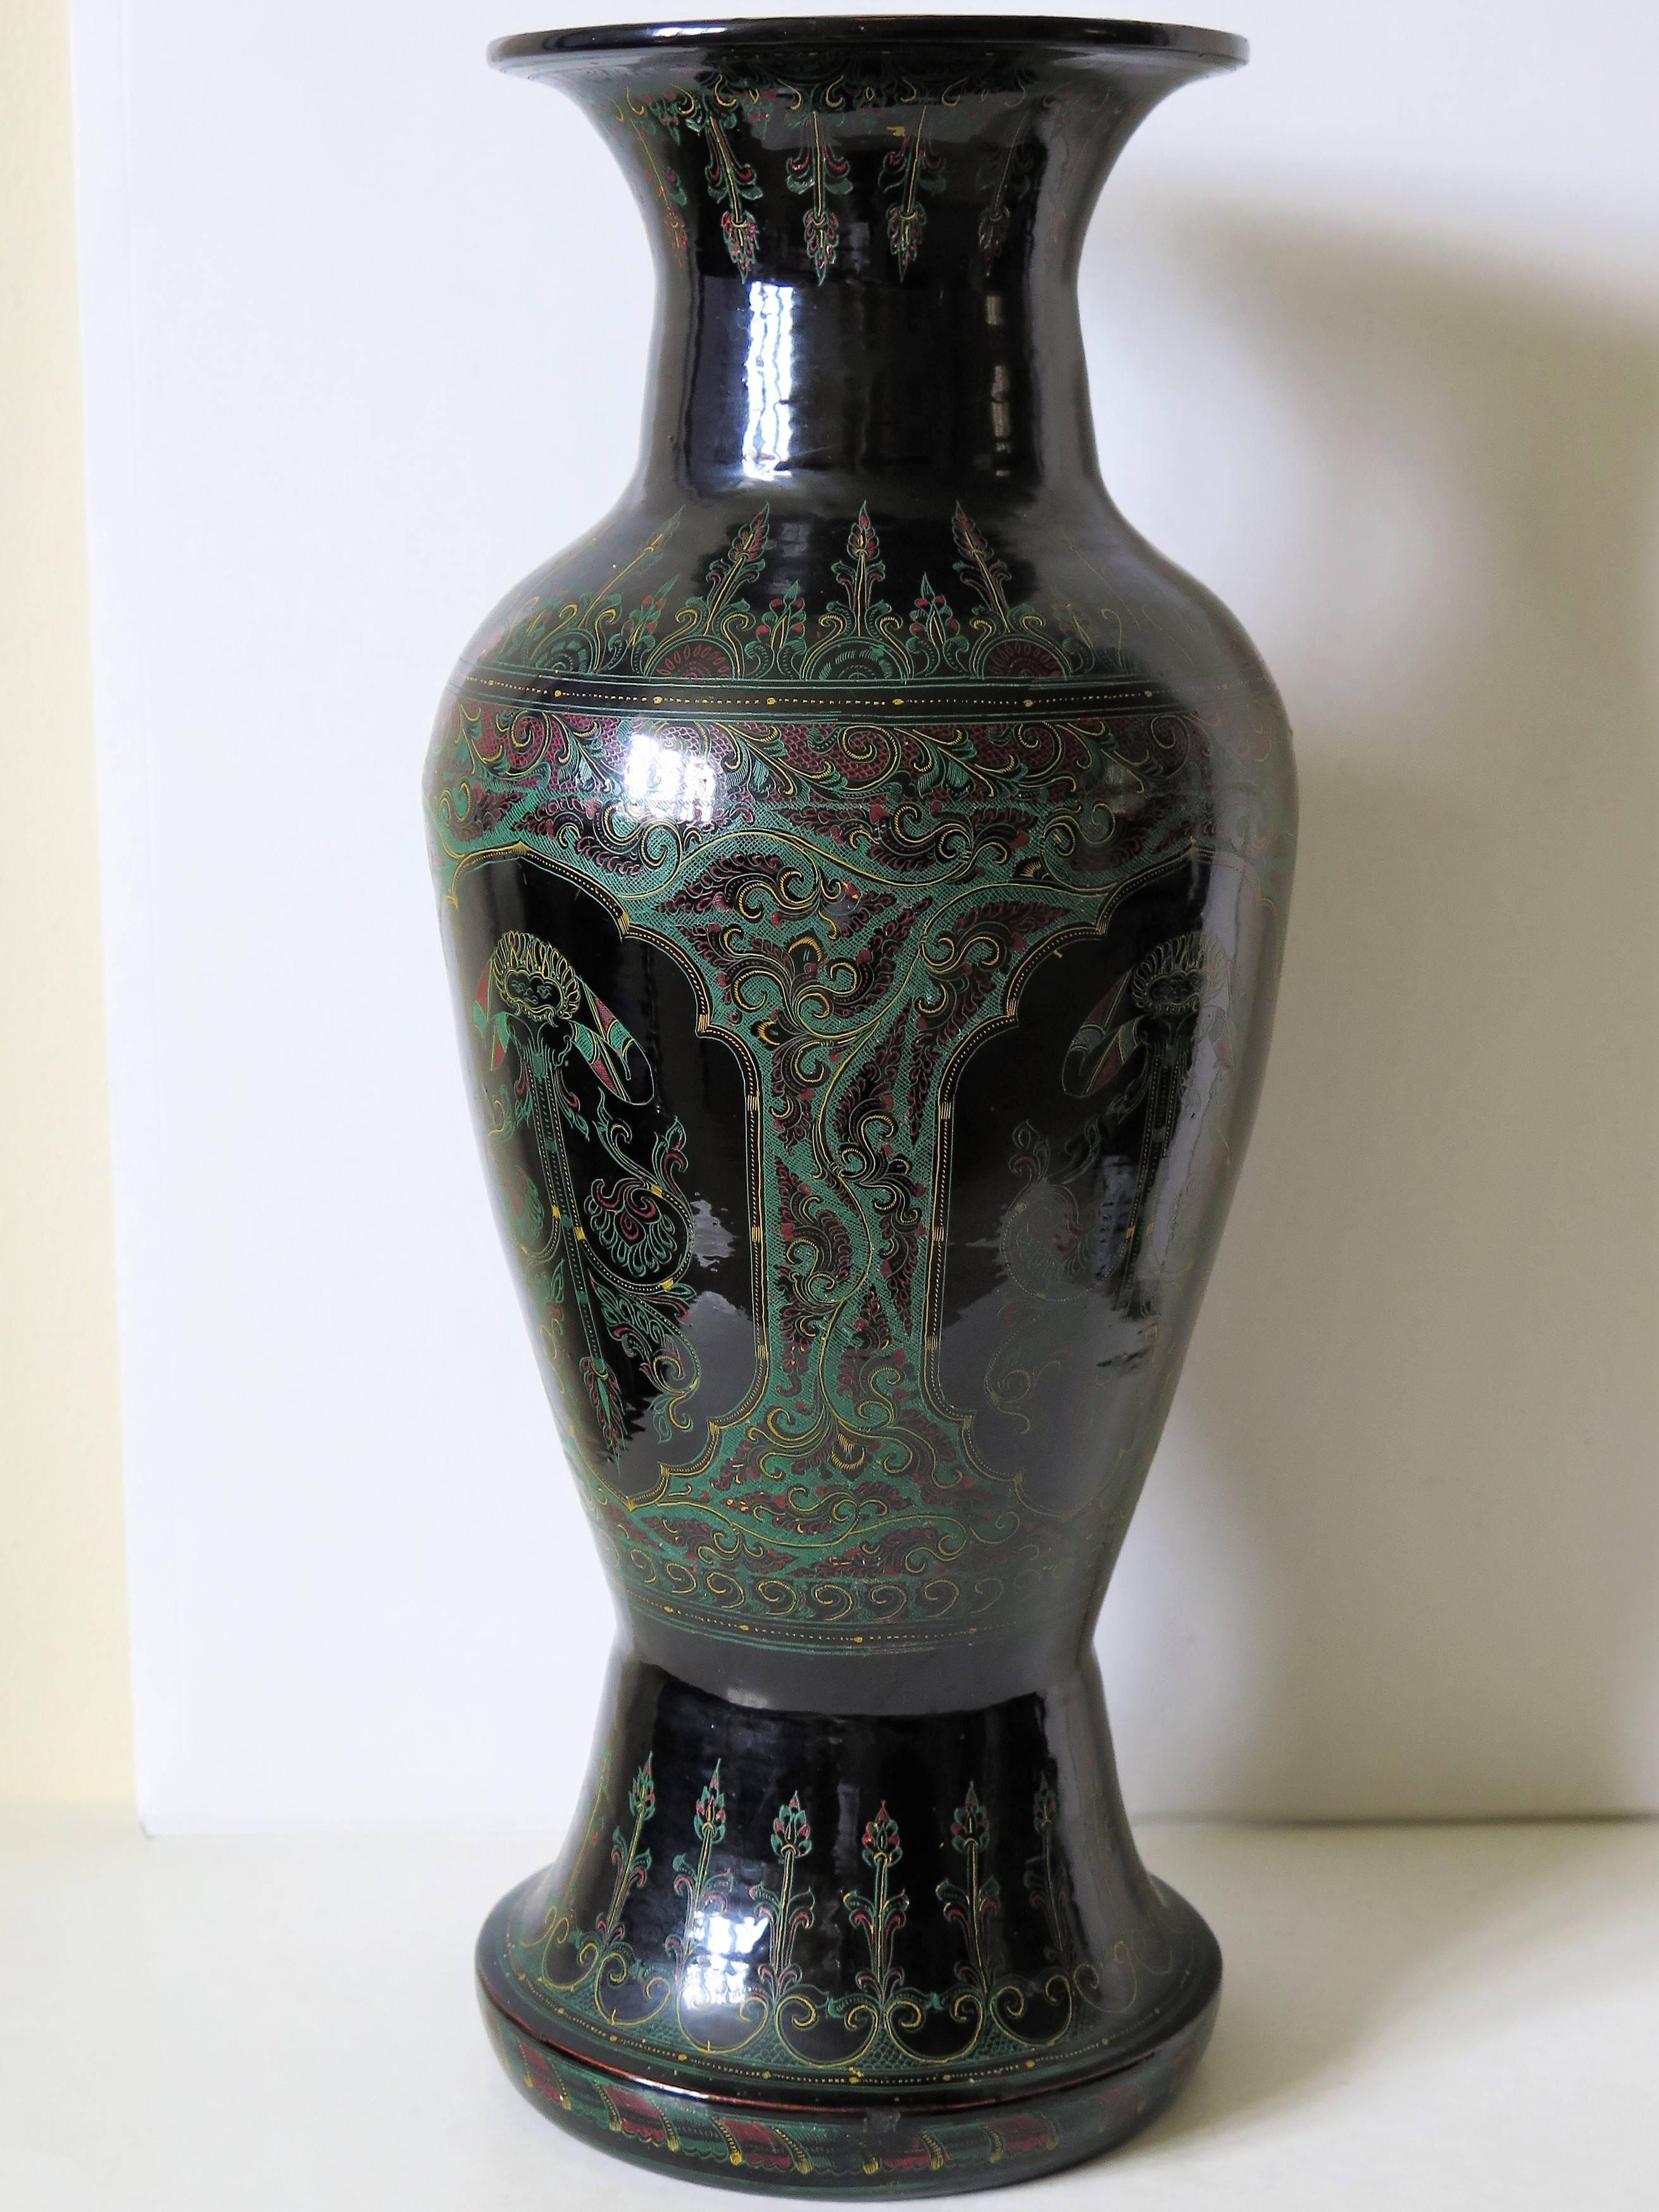 This is a large, unusual and very decorative Vase, made from Laquered Papier-Mache, which has been very finely hand painted and dating to the 19th century.

The vase has a baluster shape on a deep foot section and flared rim.

The vase has a black